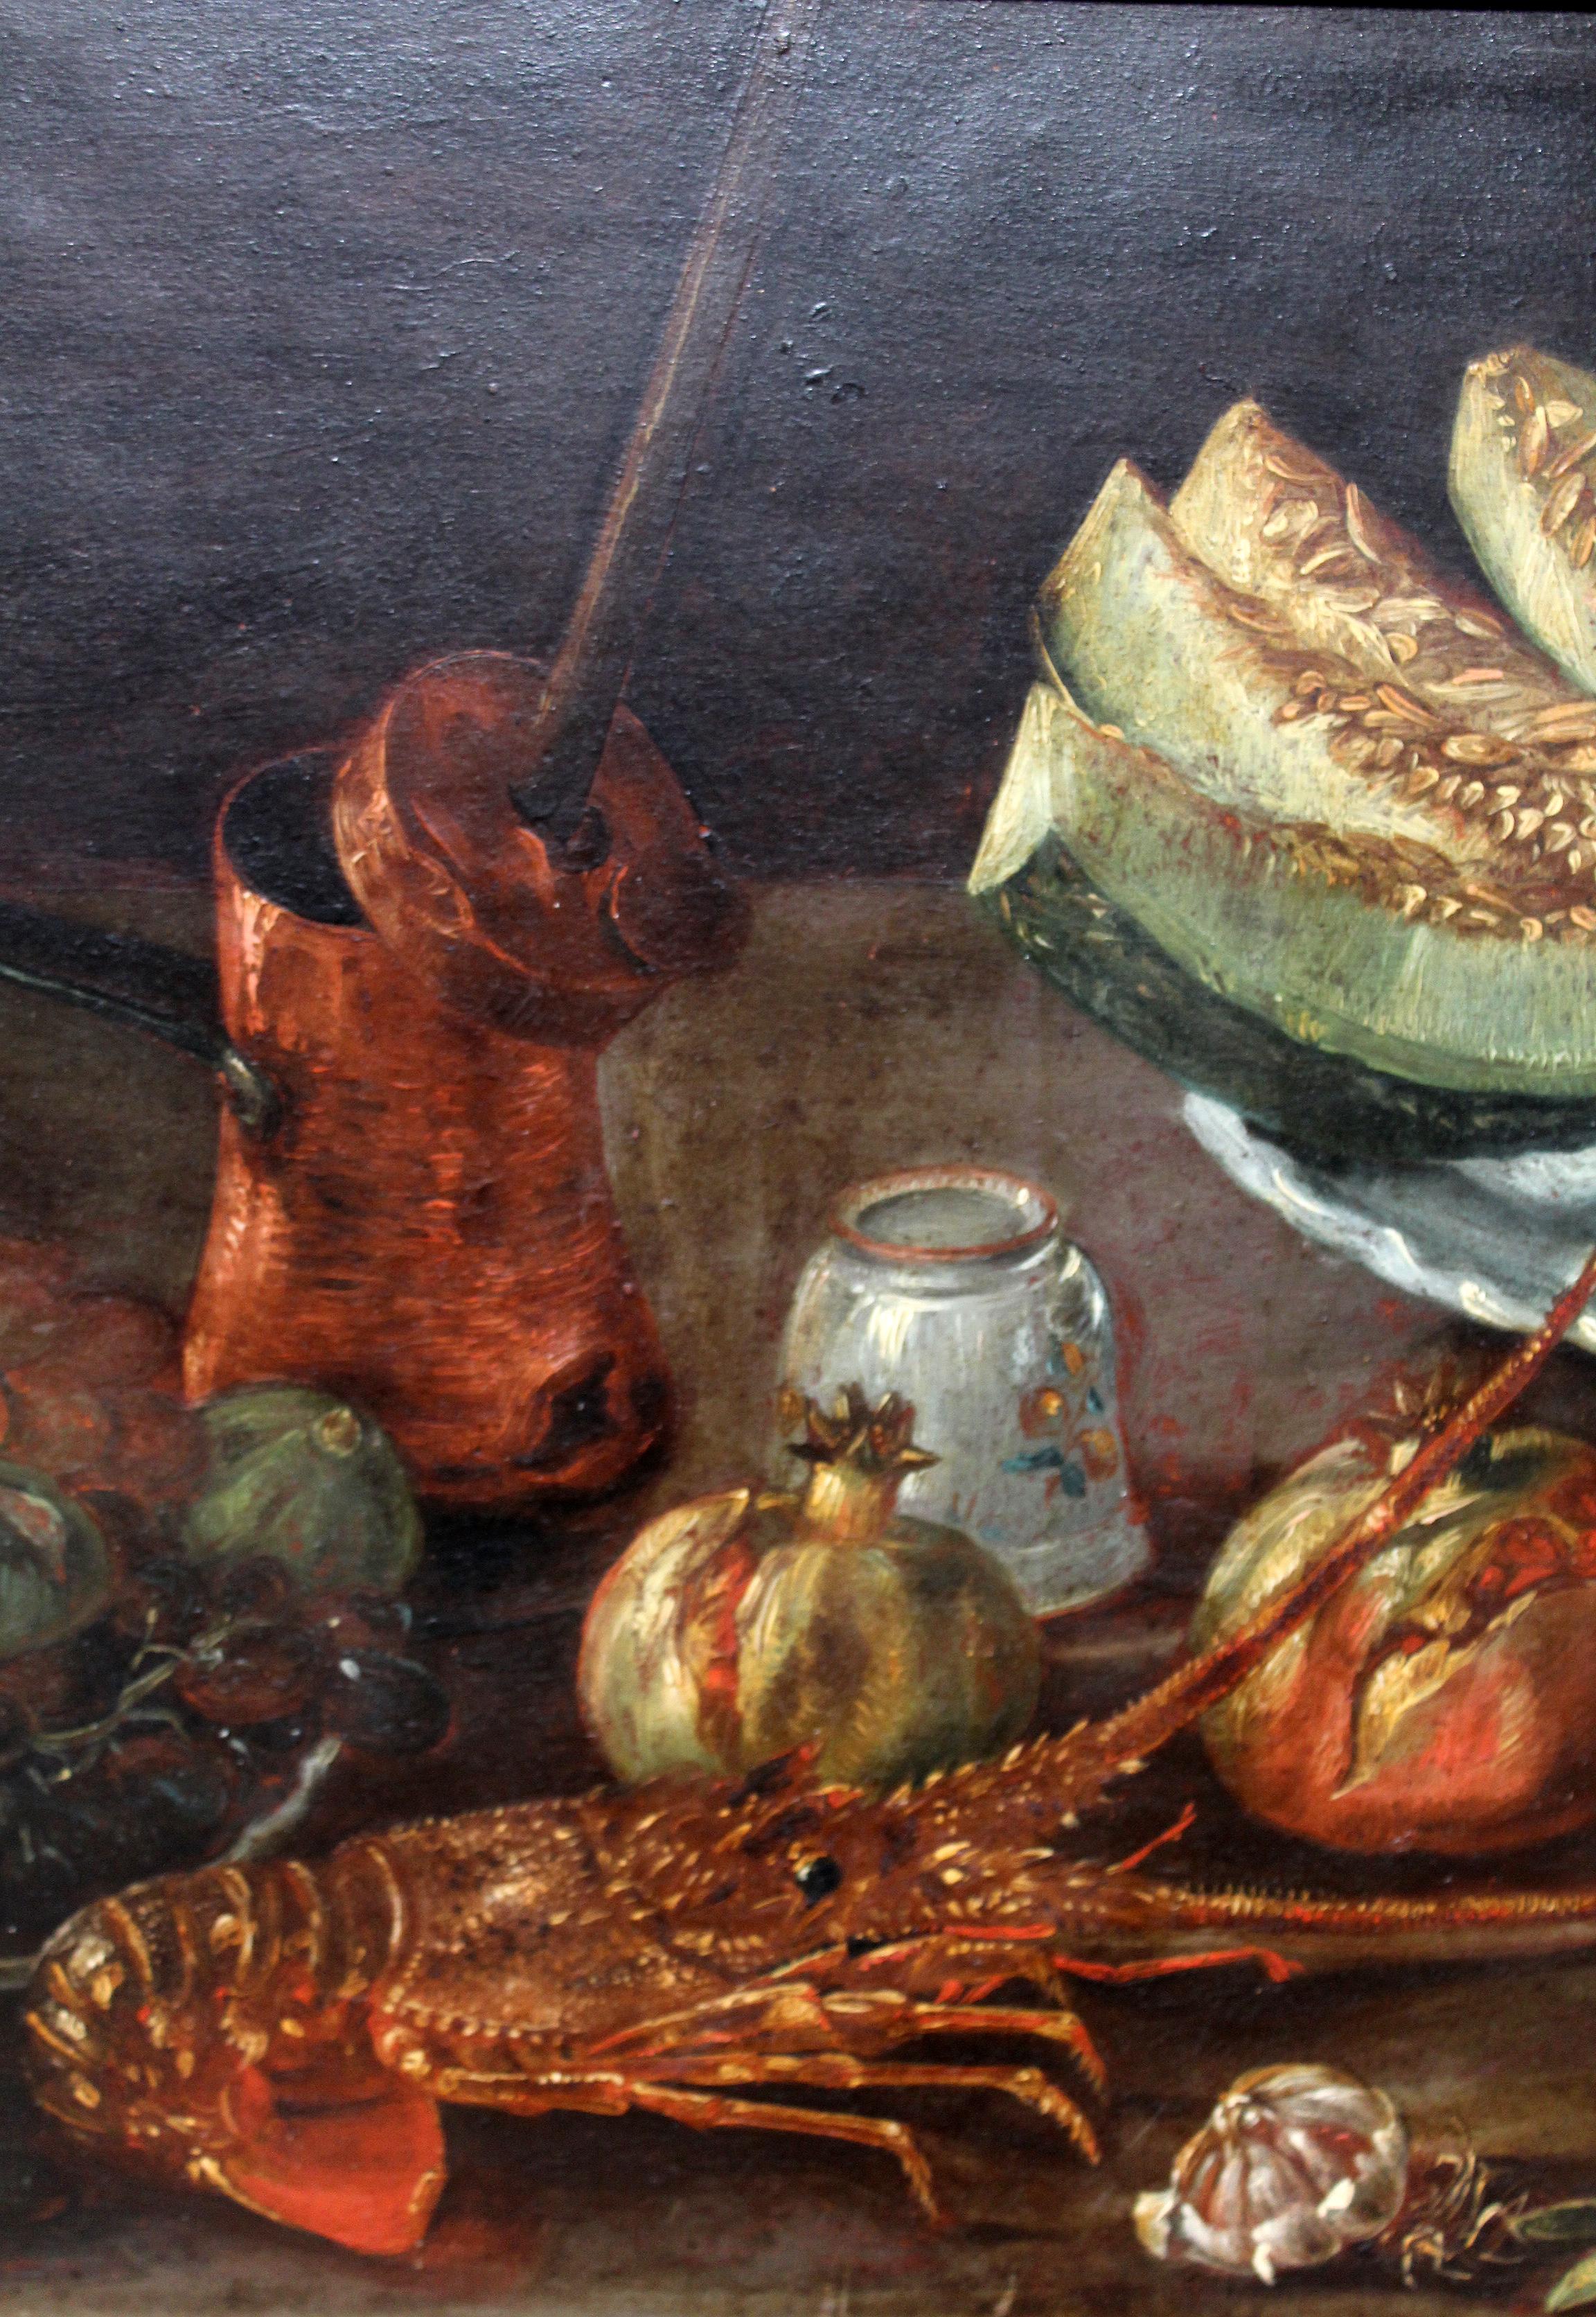 Hand-Painted 19th Century Spanish Bodegon with Lobster and Melon Still Life Oil on Carton